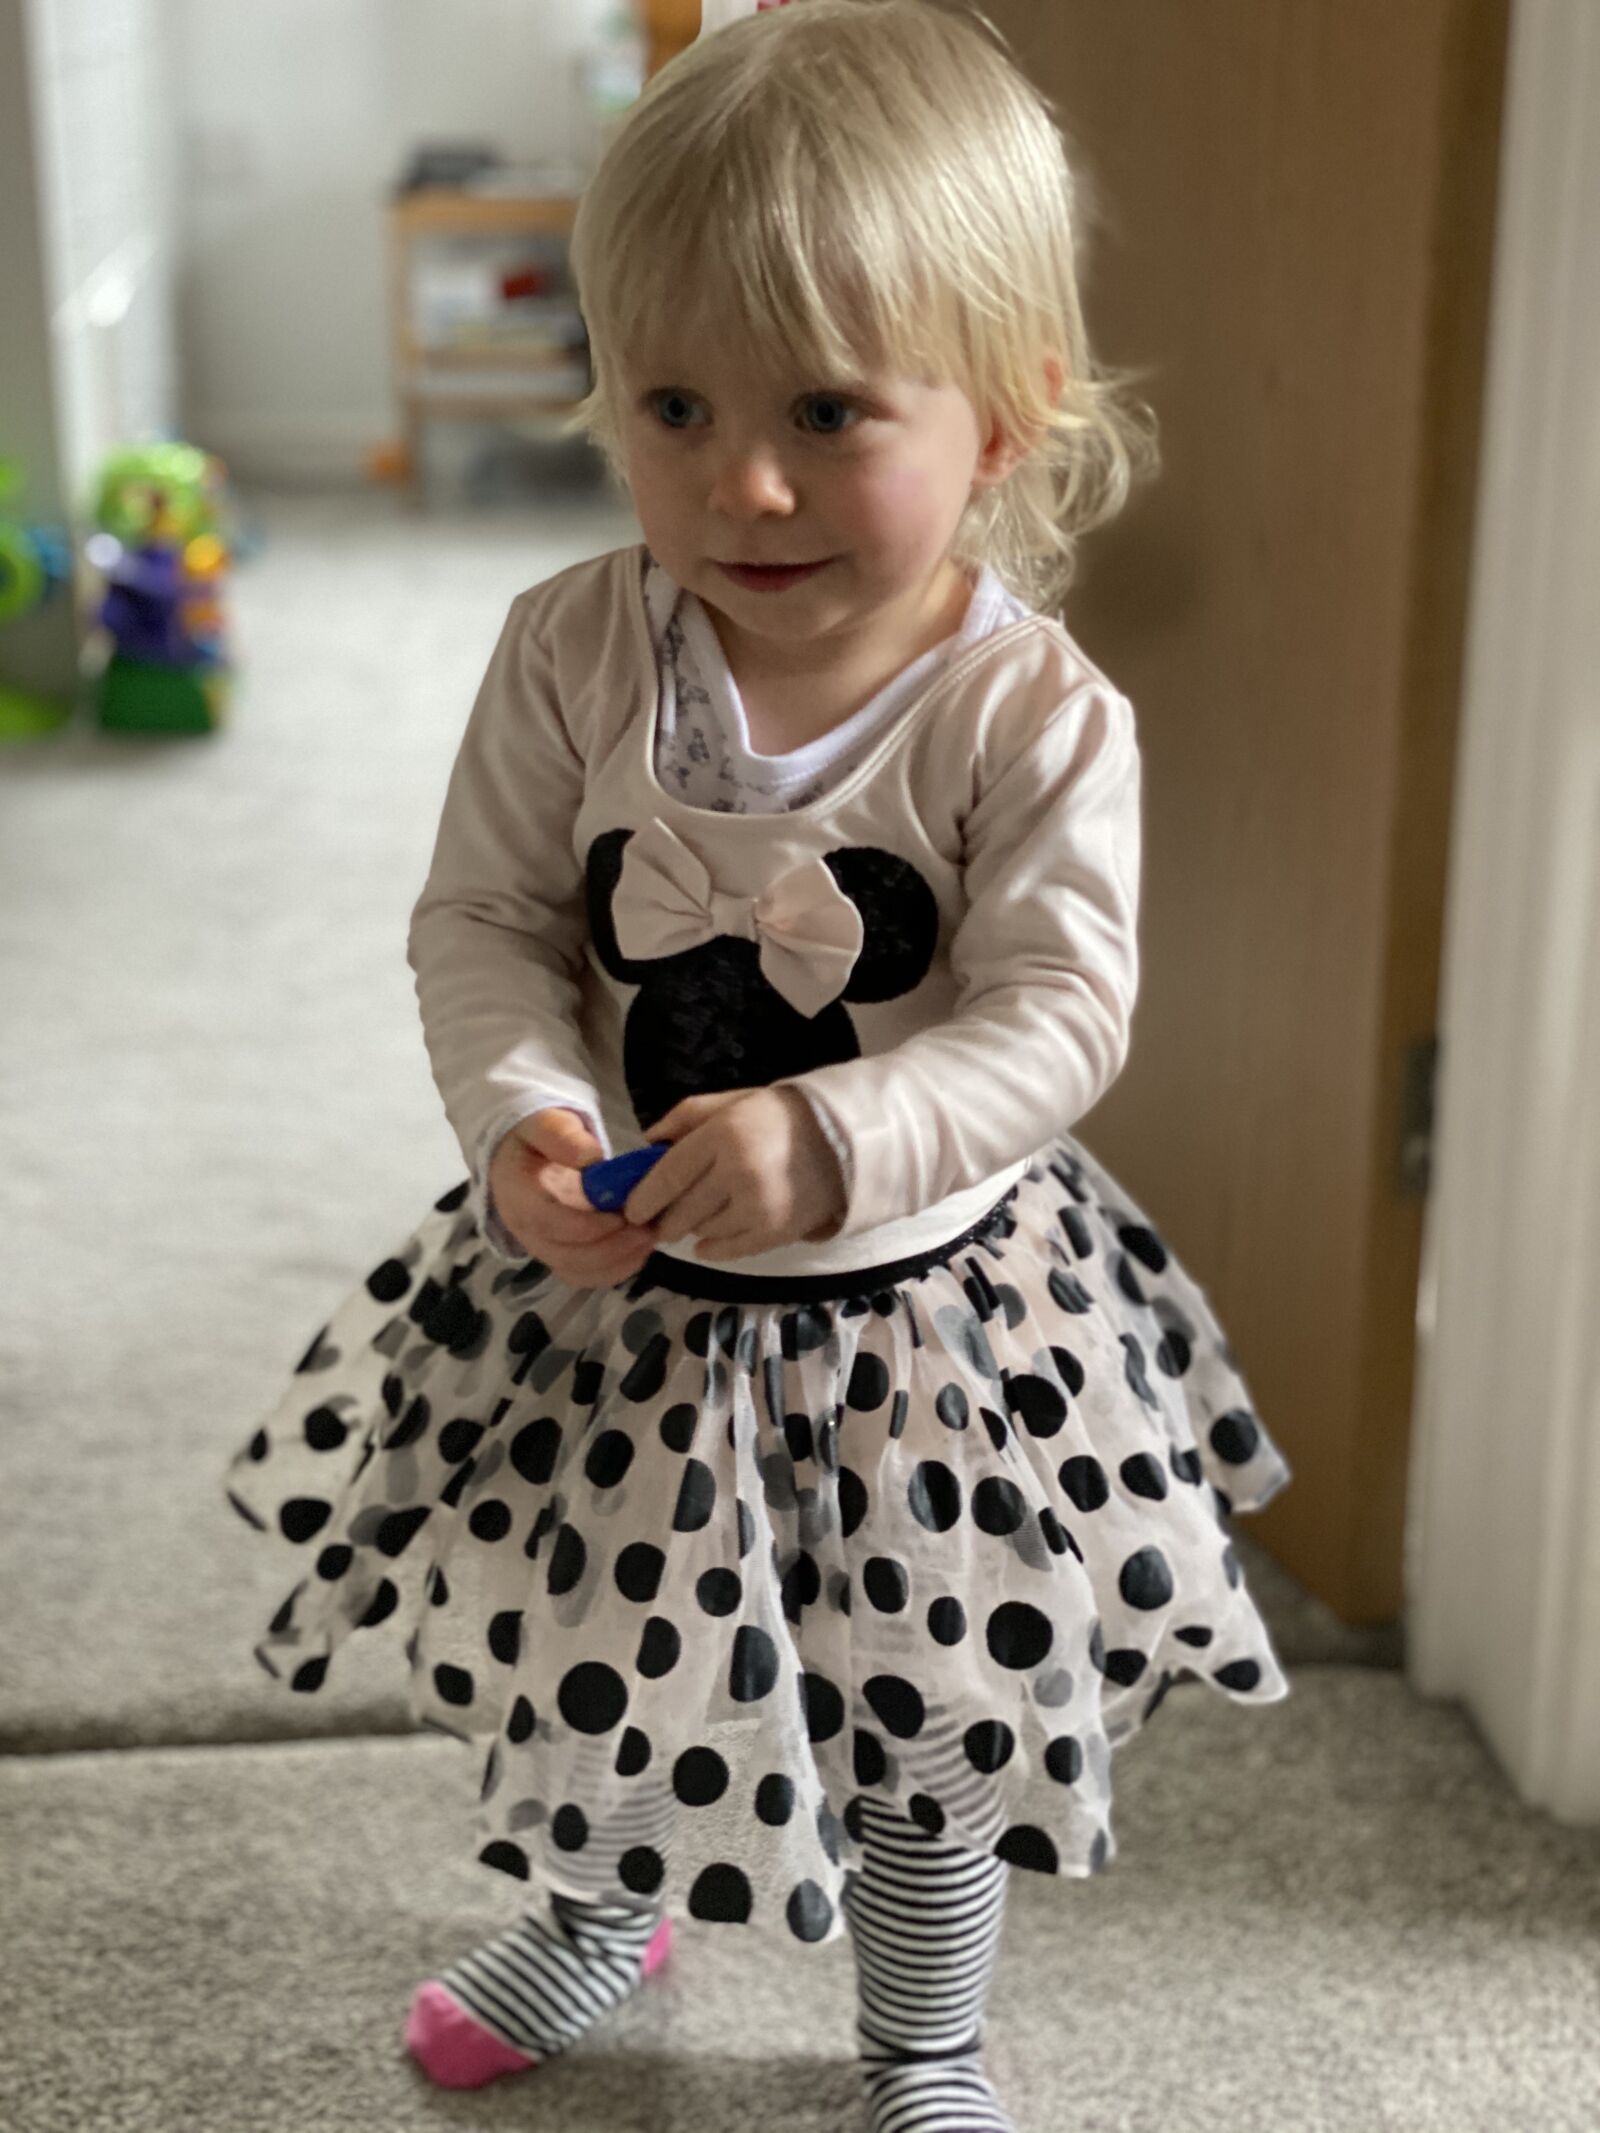 iPhone 11 Pro back dual camera 6mm f/2 sample photo. Toddler, blonde, girl photography